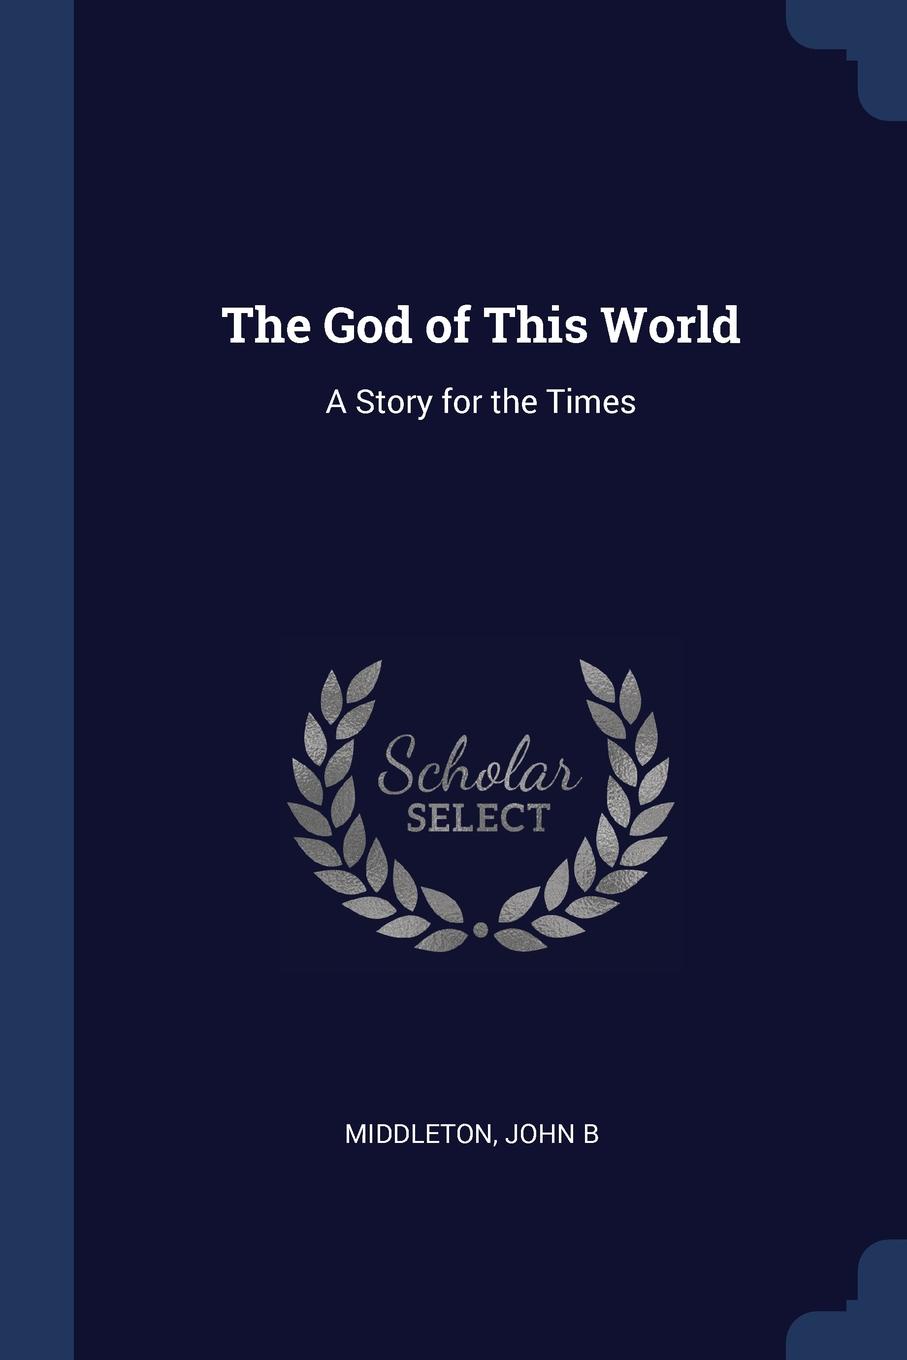 The God of This World. A Story for the Times